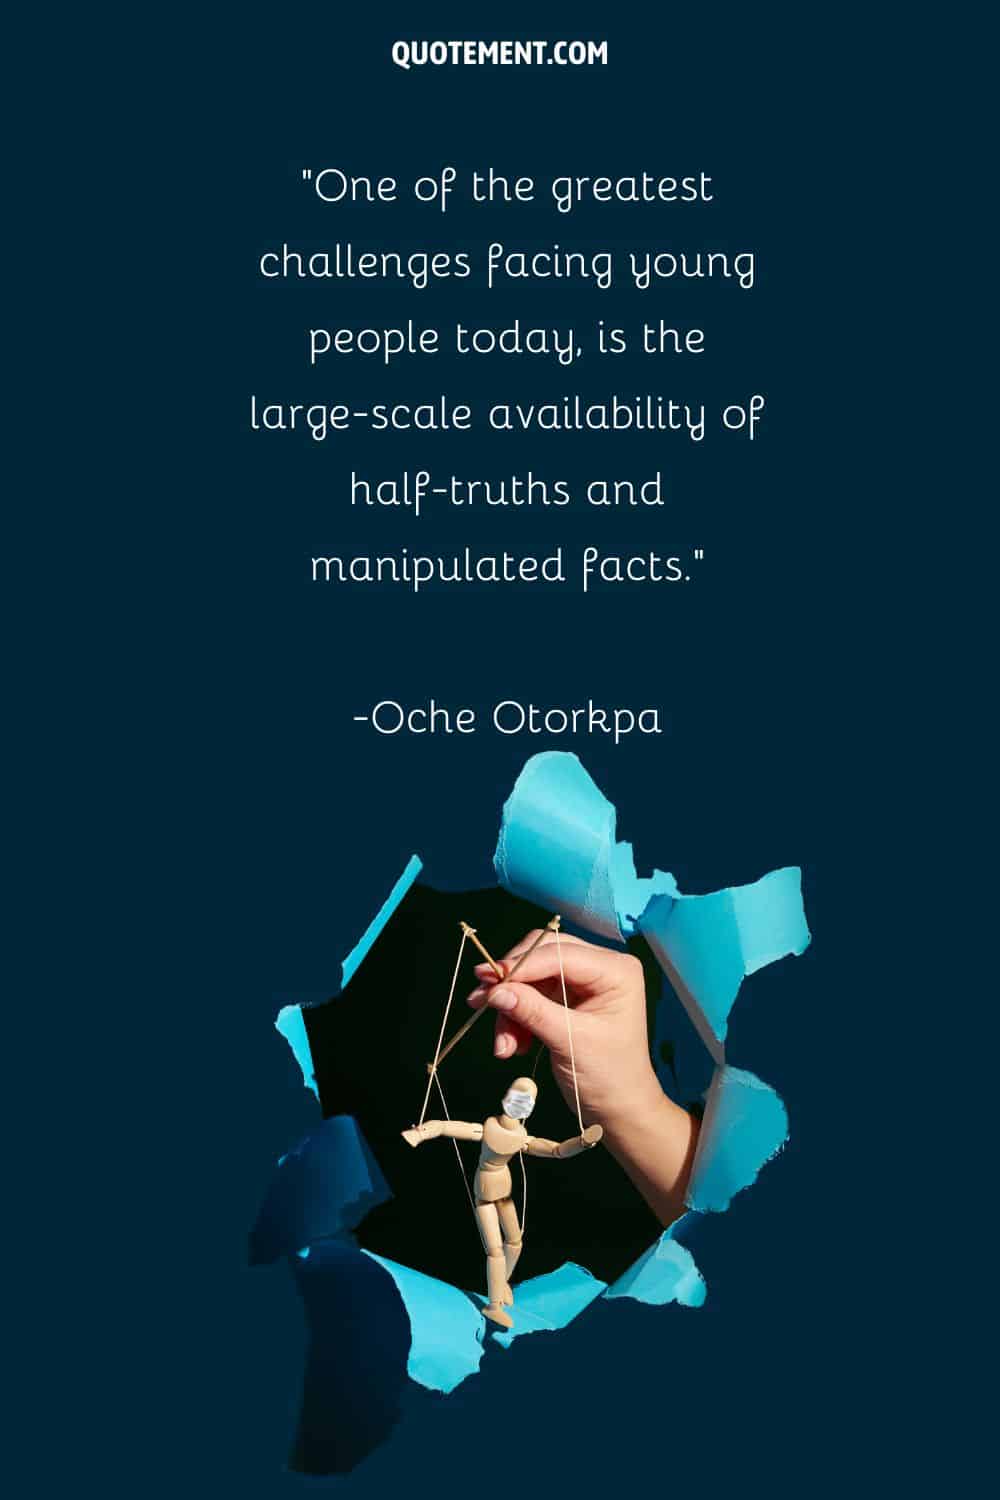 string puppet illustration representing quote about manipulated facts